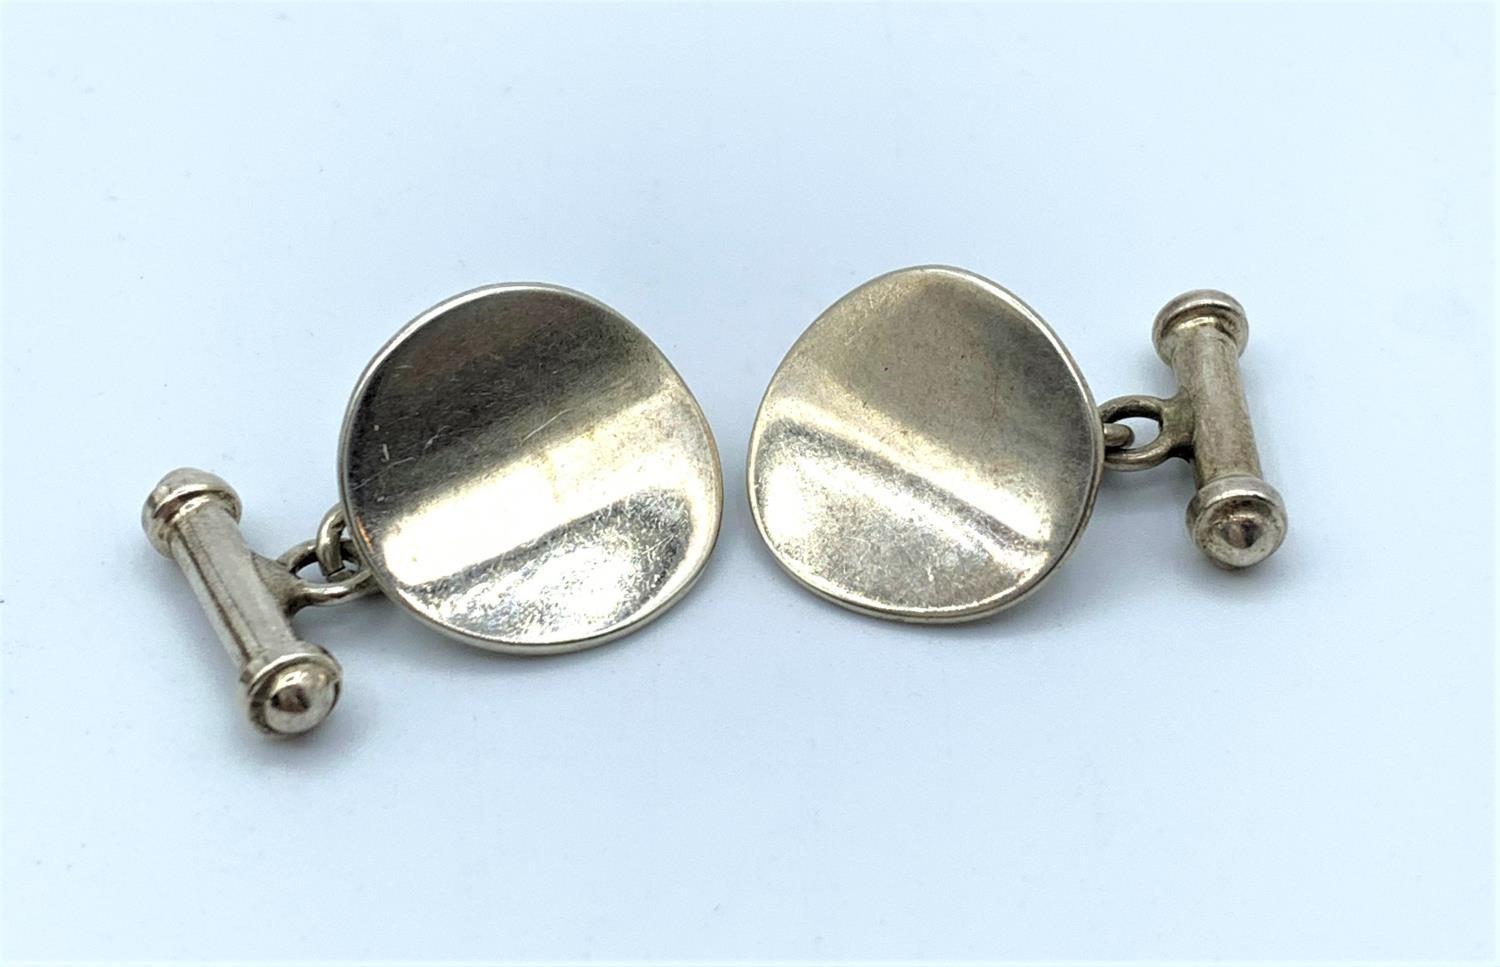 Pair of Vintage Silver Cufflinks, weight 9g - Image 2 of 4